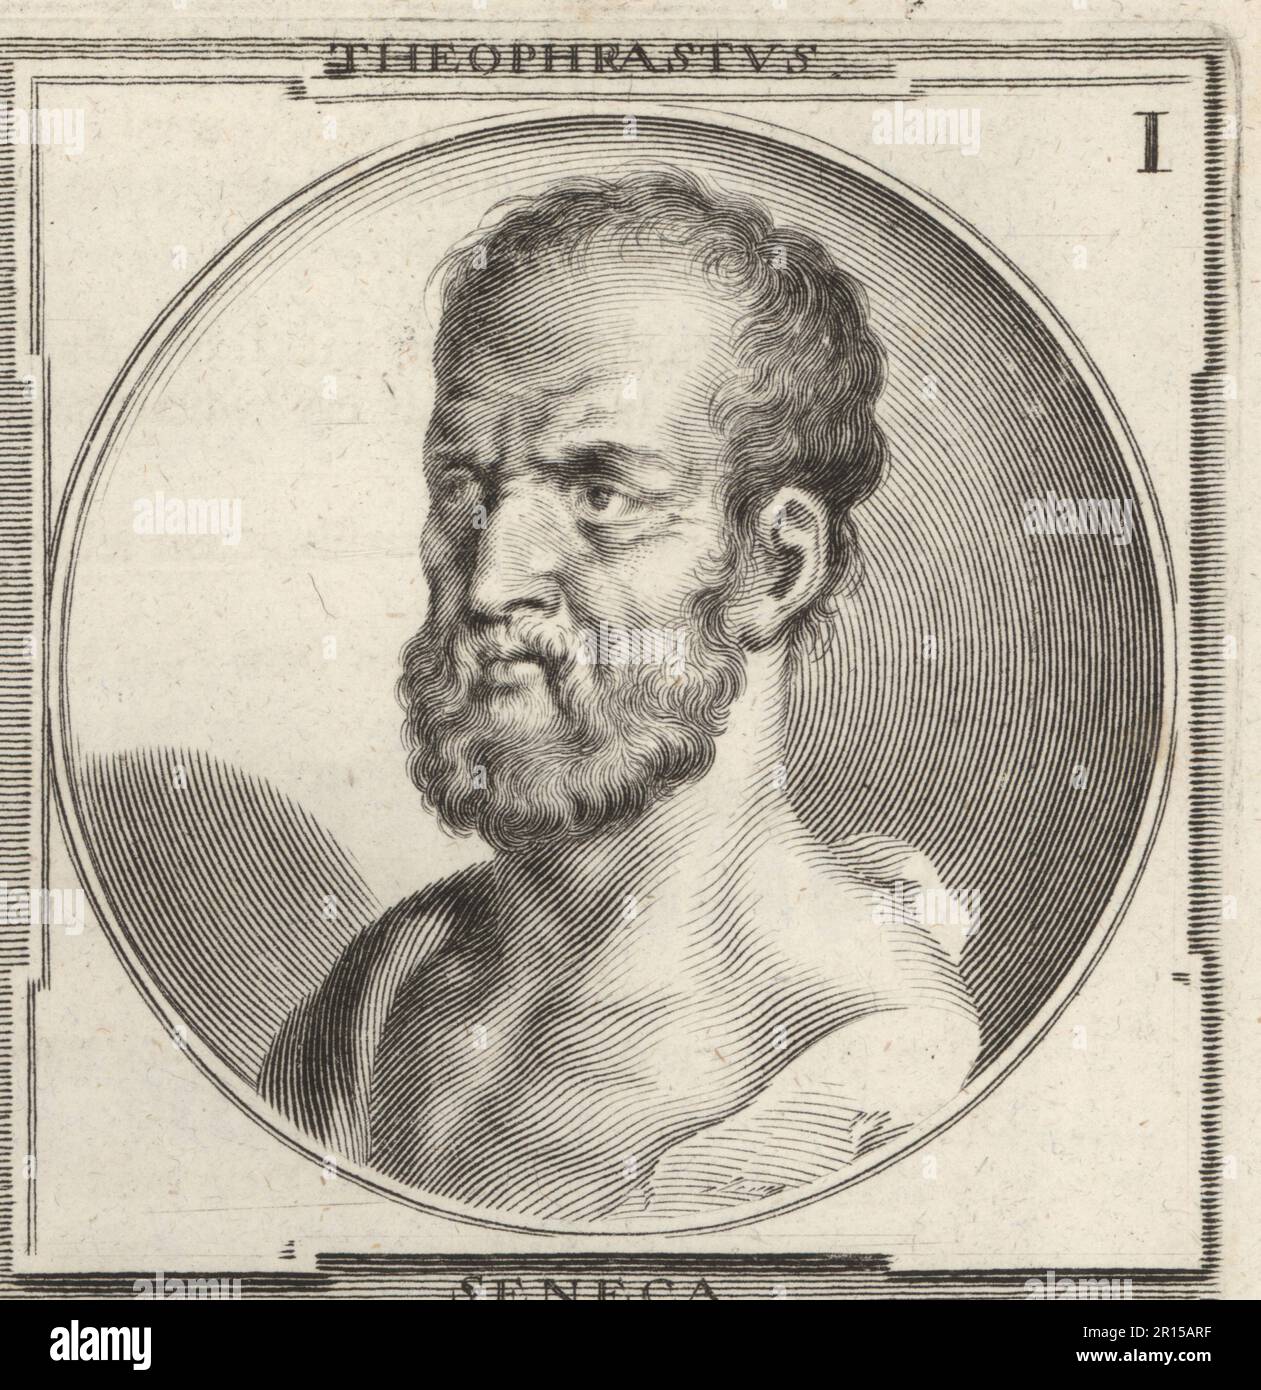 Theophrastus, Greek philosopher and the successor to Aristotle in the Peripatetic school, c.371-287 BC. Theophrastus. Copperplate engraving by Bartholomaus Kilian after an illustration by Joachim von Sandrart from his L’Academia Todesca, della Architectura, Scultura & Pittura, oder Teutsche Academie, der Edlen Bau- Bild- und Mahlerey-Kunste, German Academy of Architecture, Sculpture and Painting, Jacob von Sandrart, Nuremberg, 1675. Stock Photo